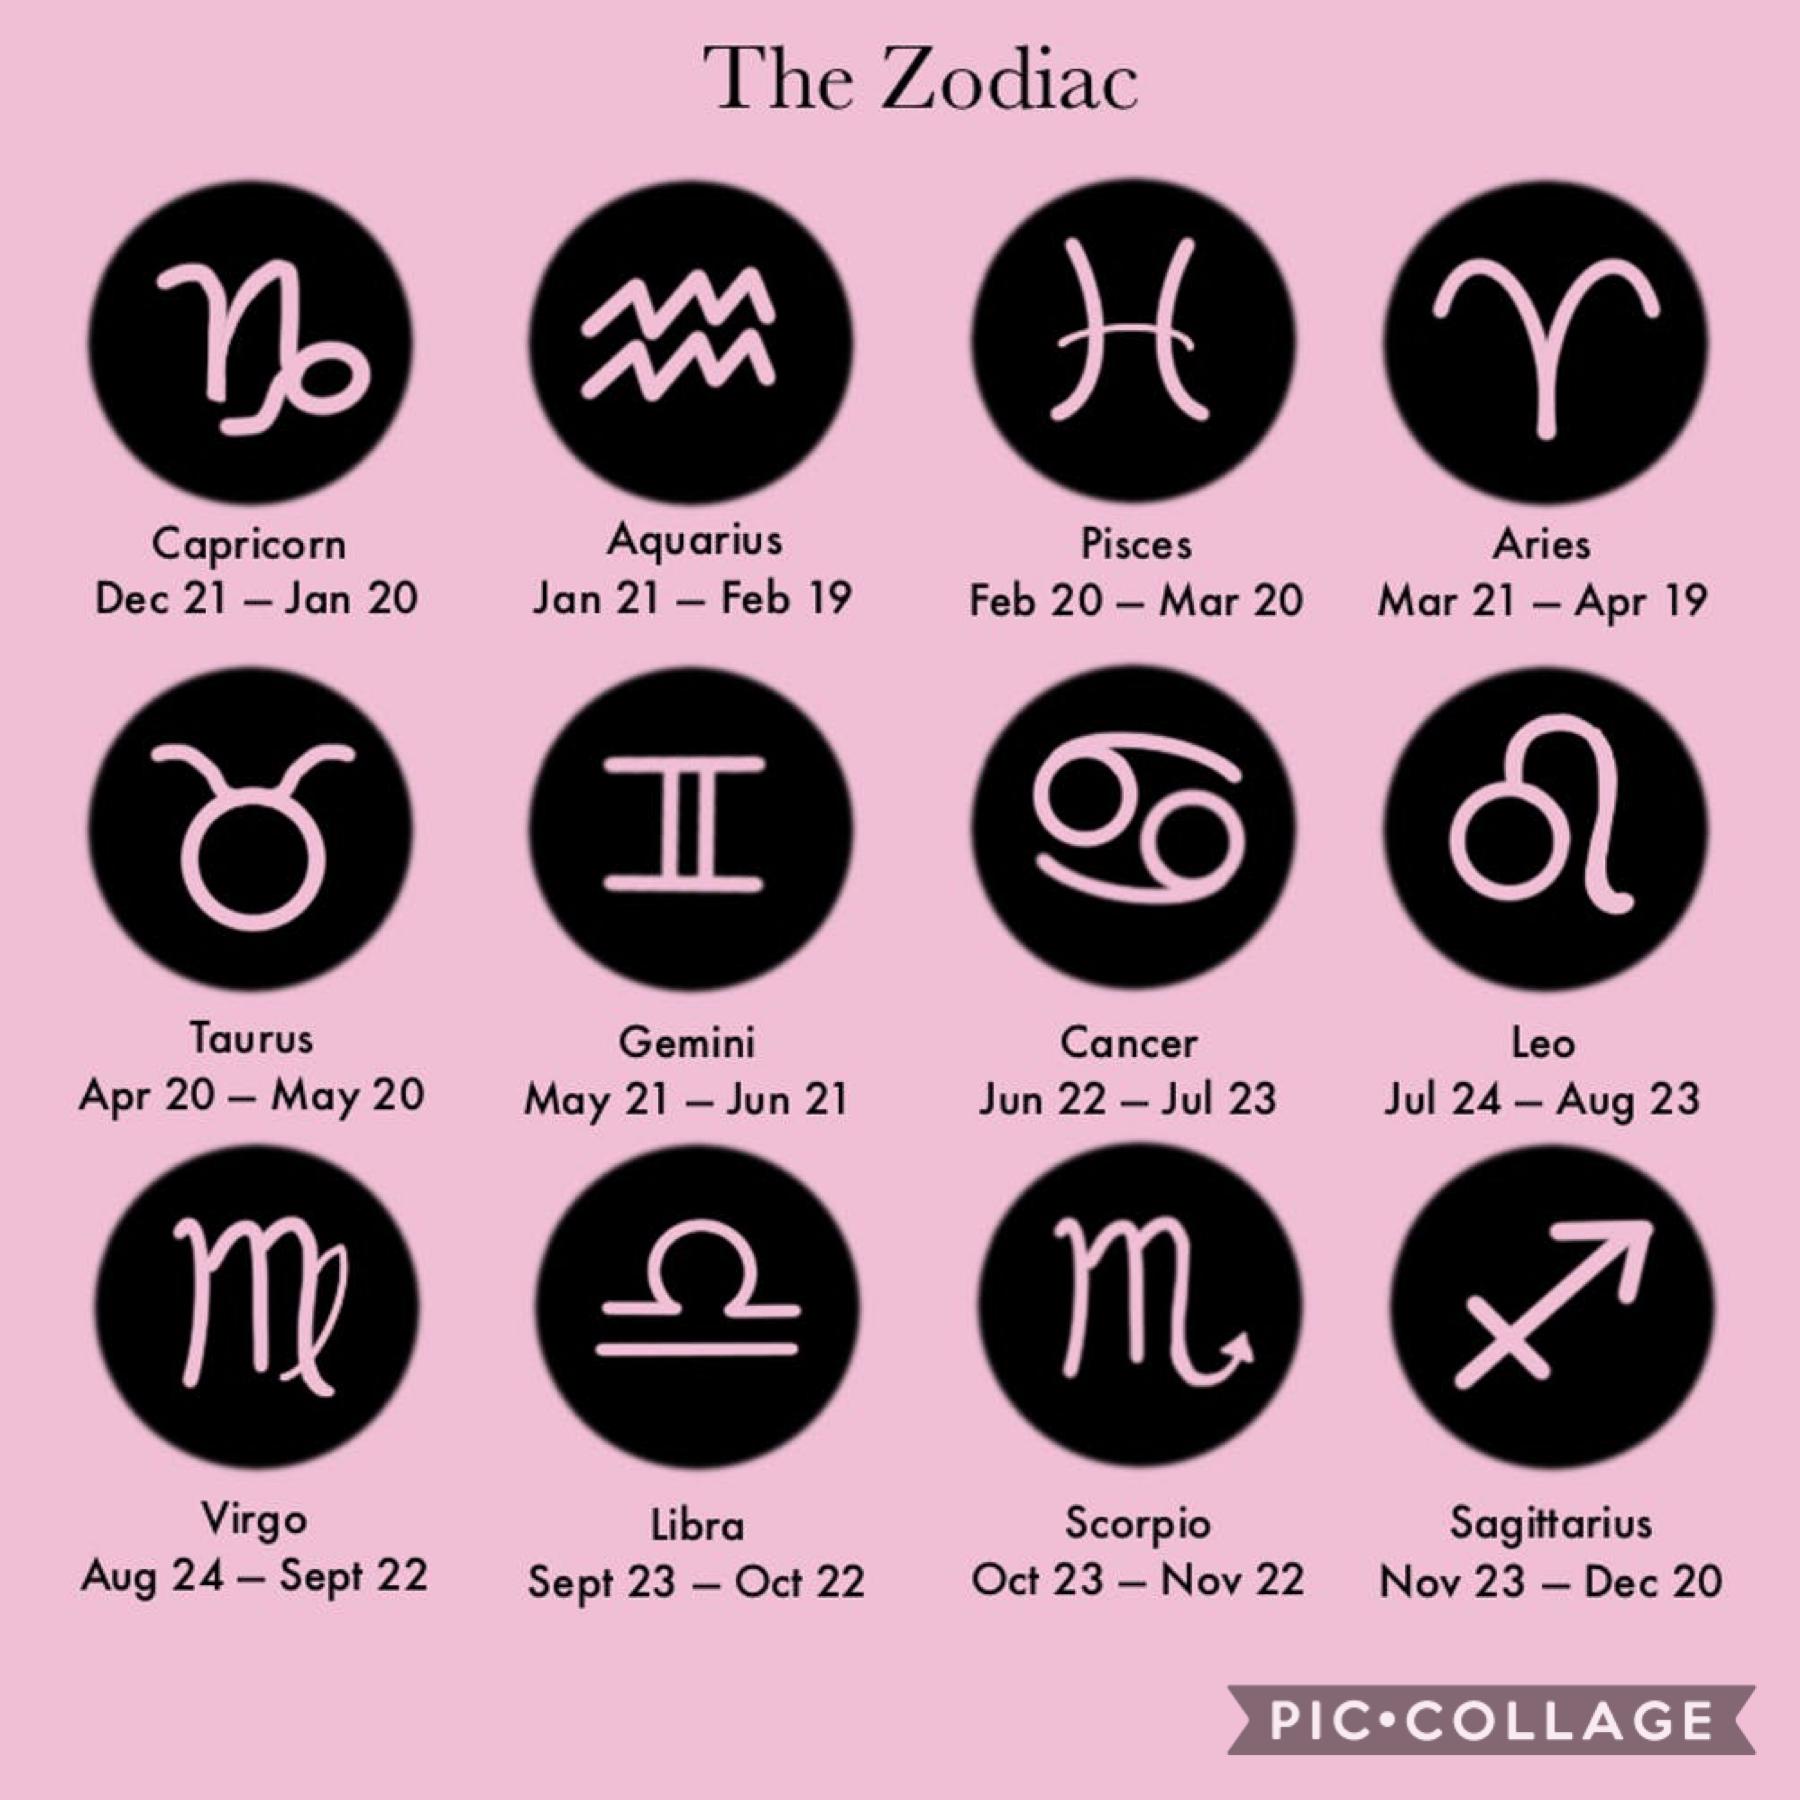 Post down below which is your zodiac sign! Lol 